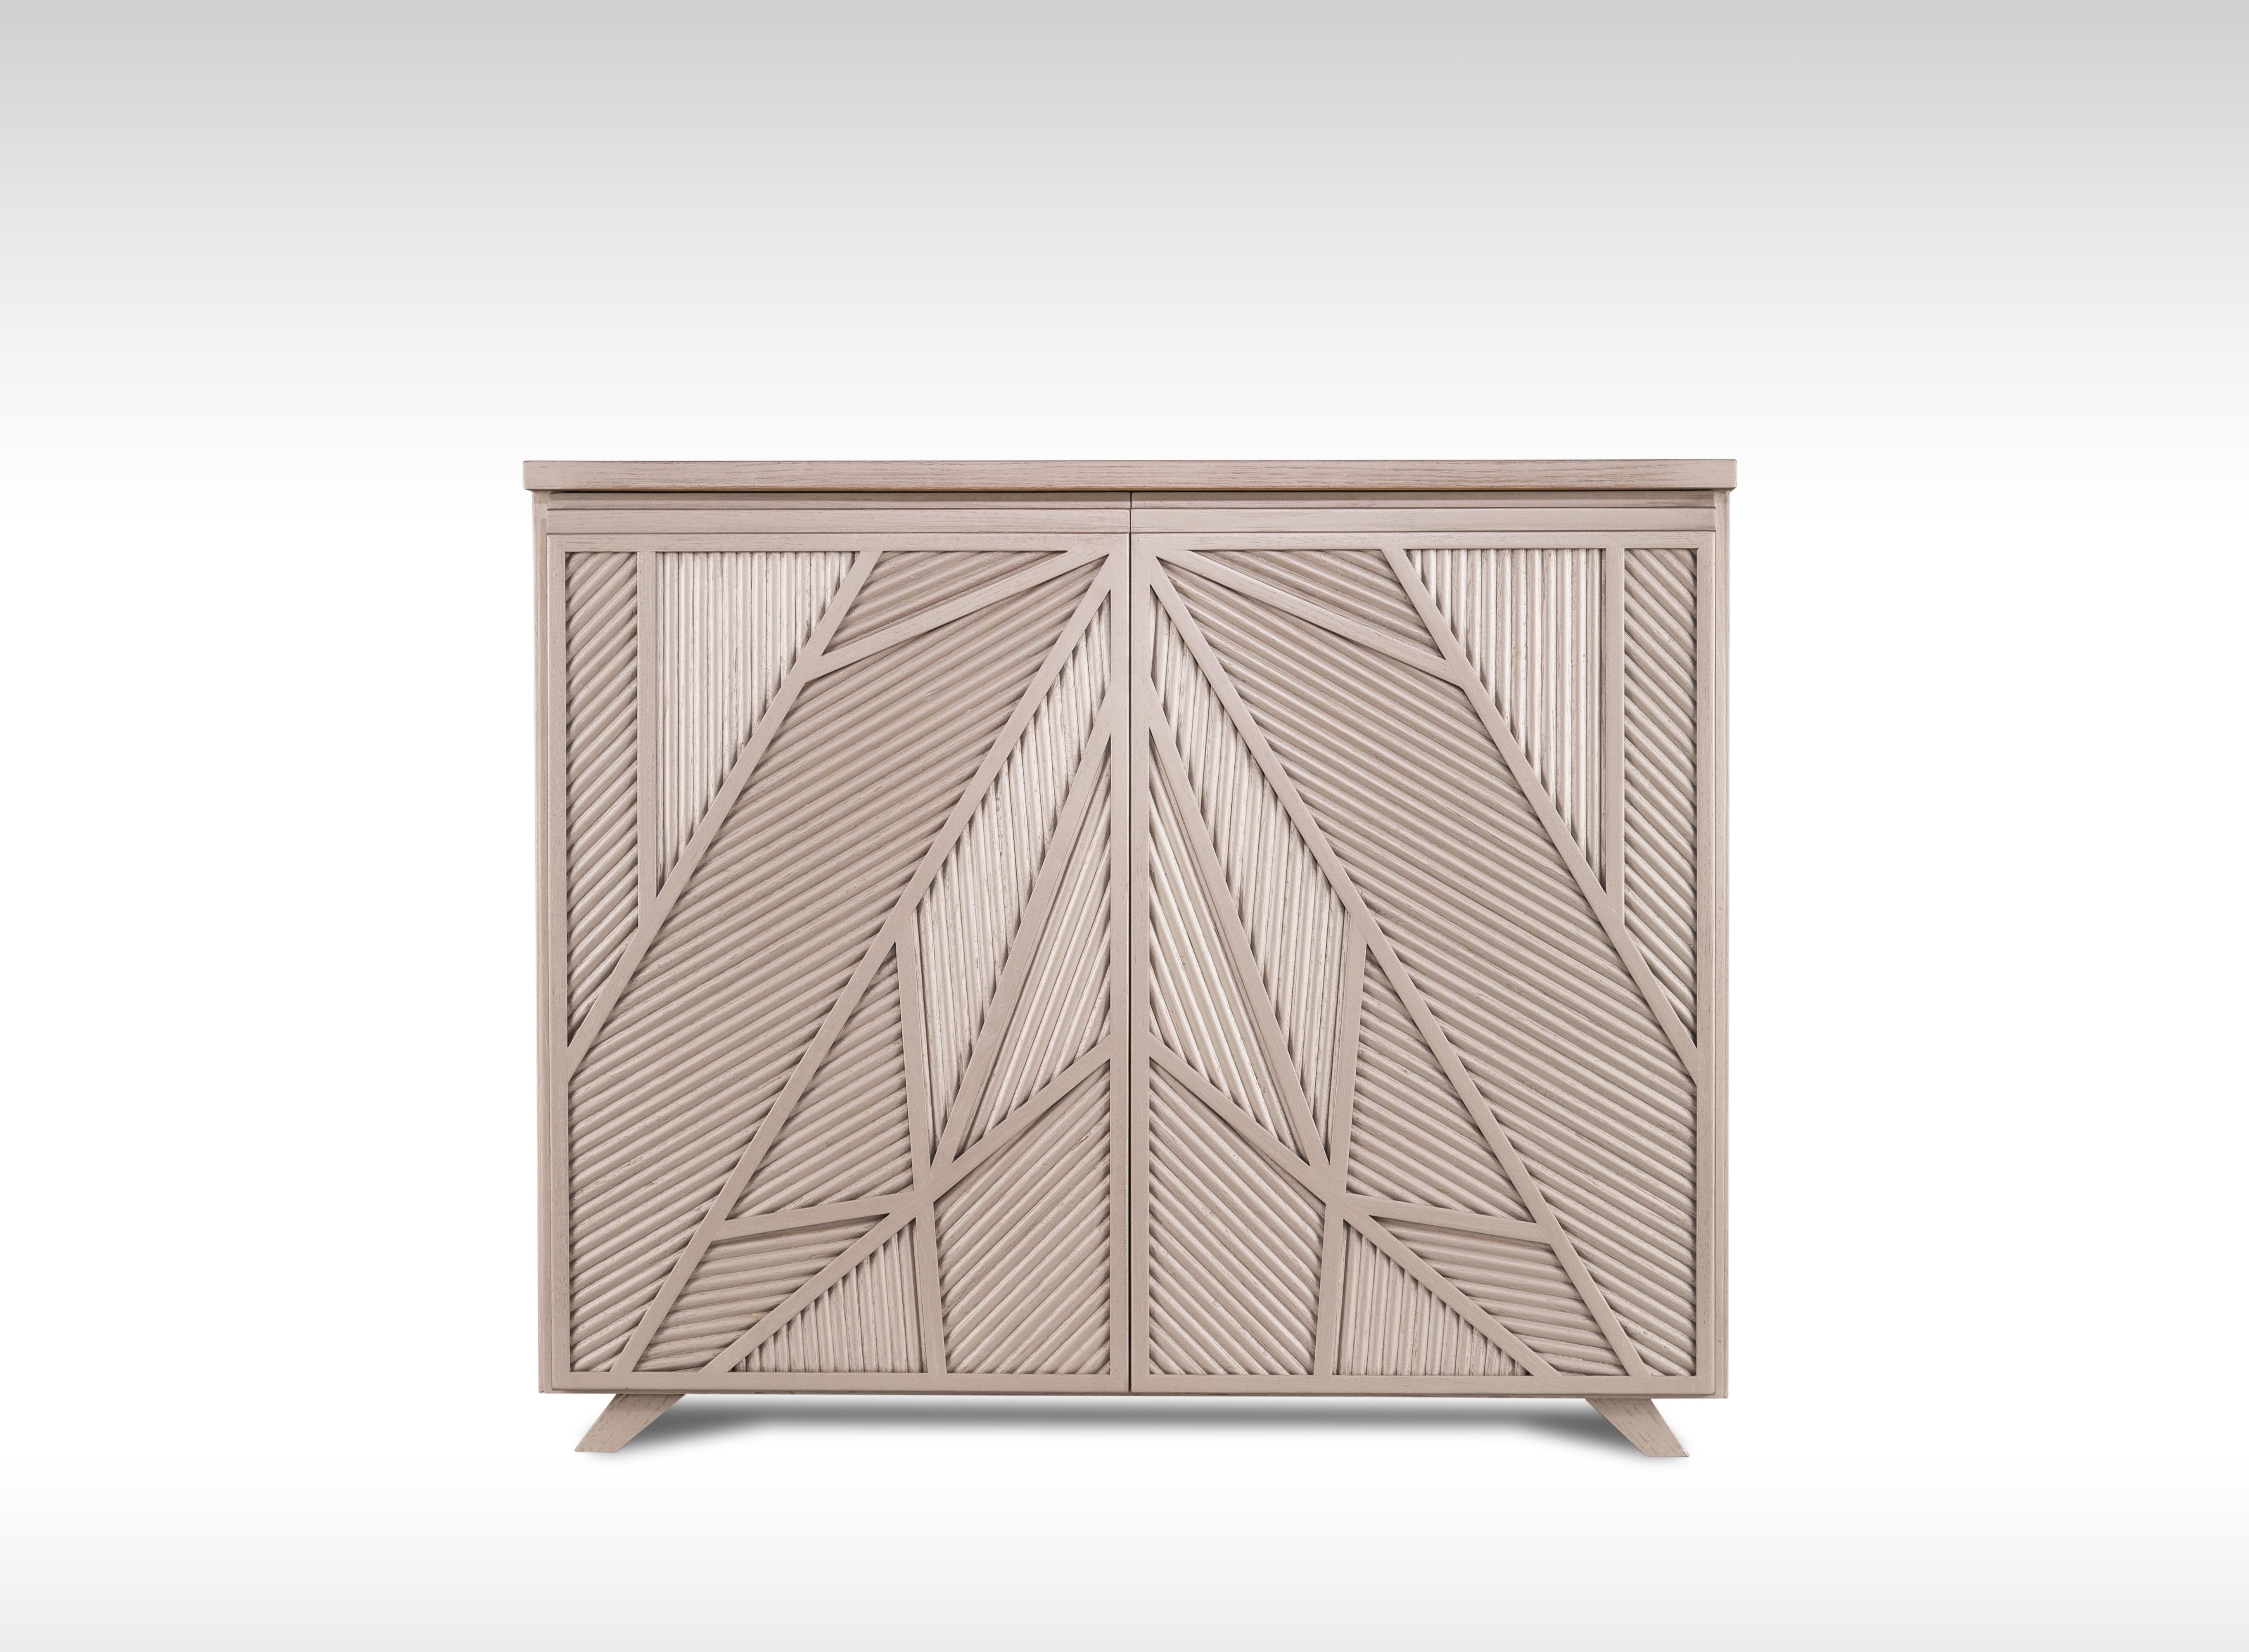 Geometric Oak Sticks Cabinet Inspired from Ancient Egypt Use of Palm Branches. 
Our unique Cool Palm cabinet is made of stained oak wood sticks manifesting the use of woven palms in the Egyptian heritage. The dynamic pattern of the cabinet will